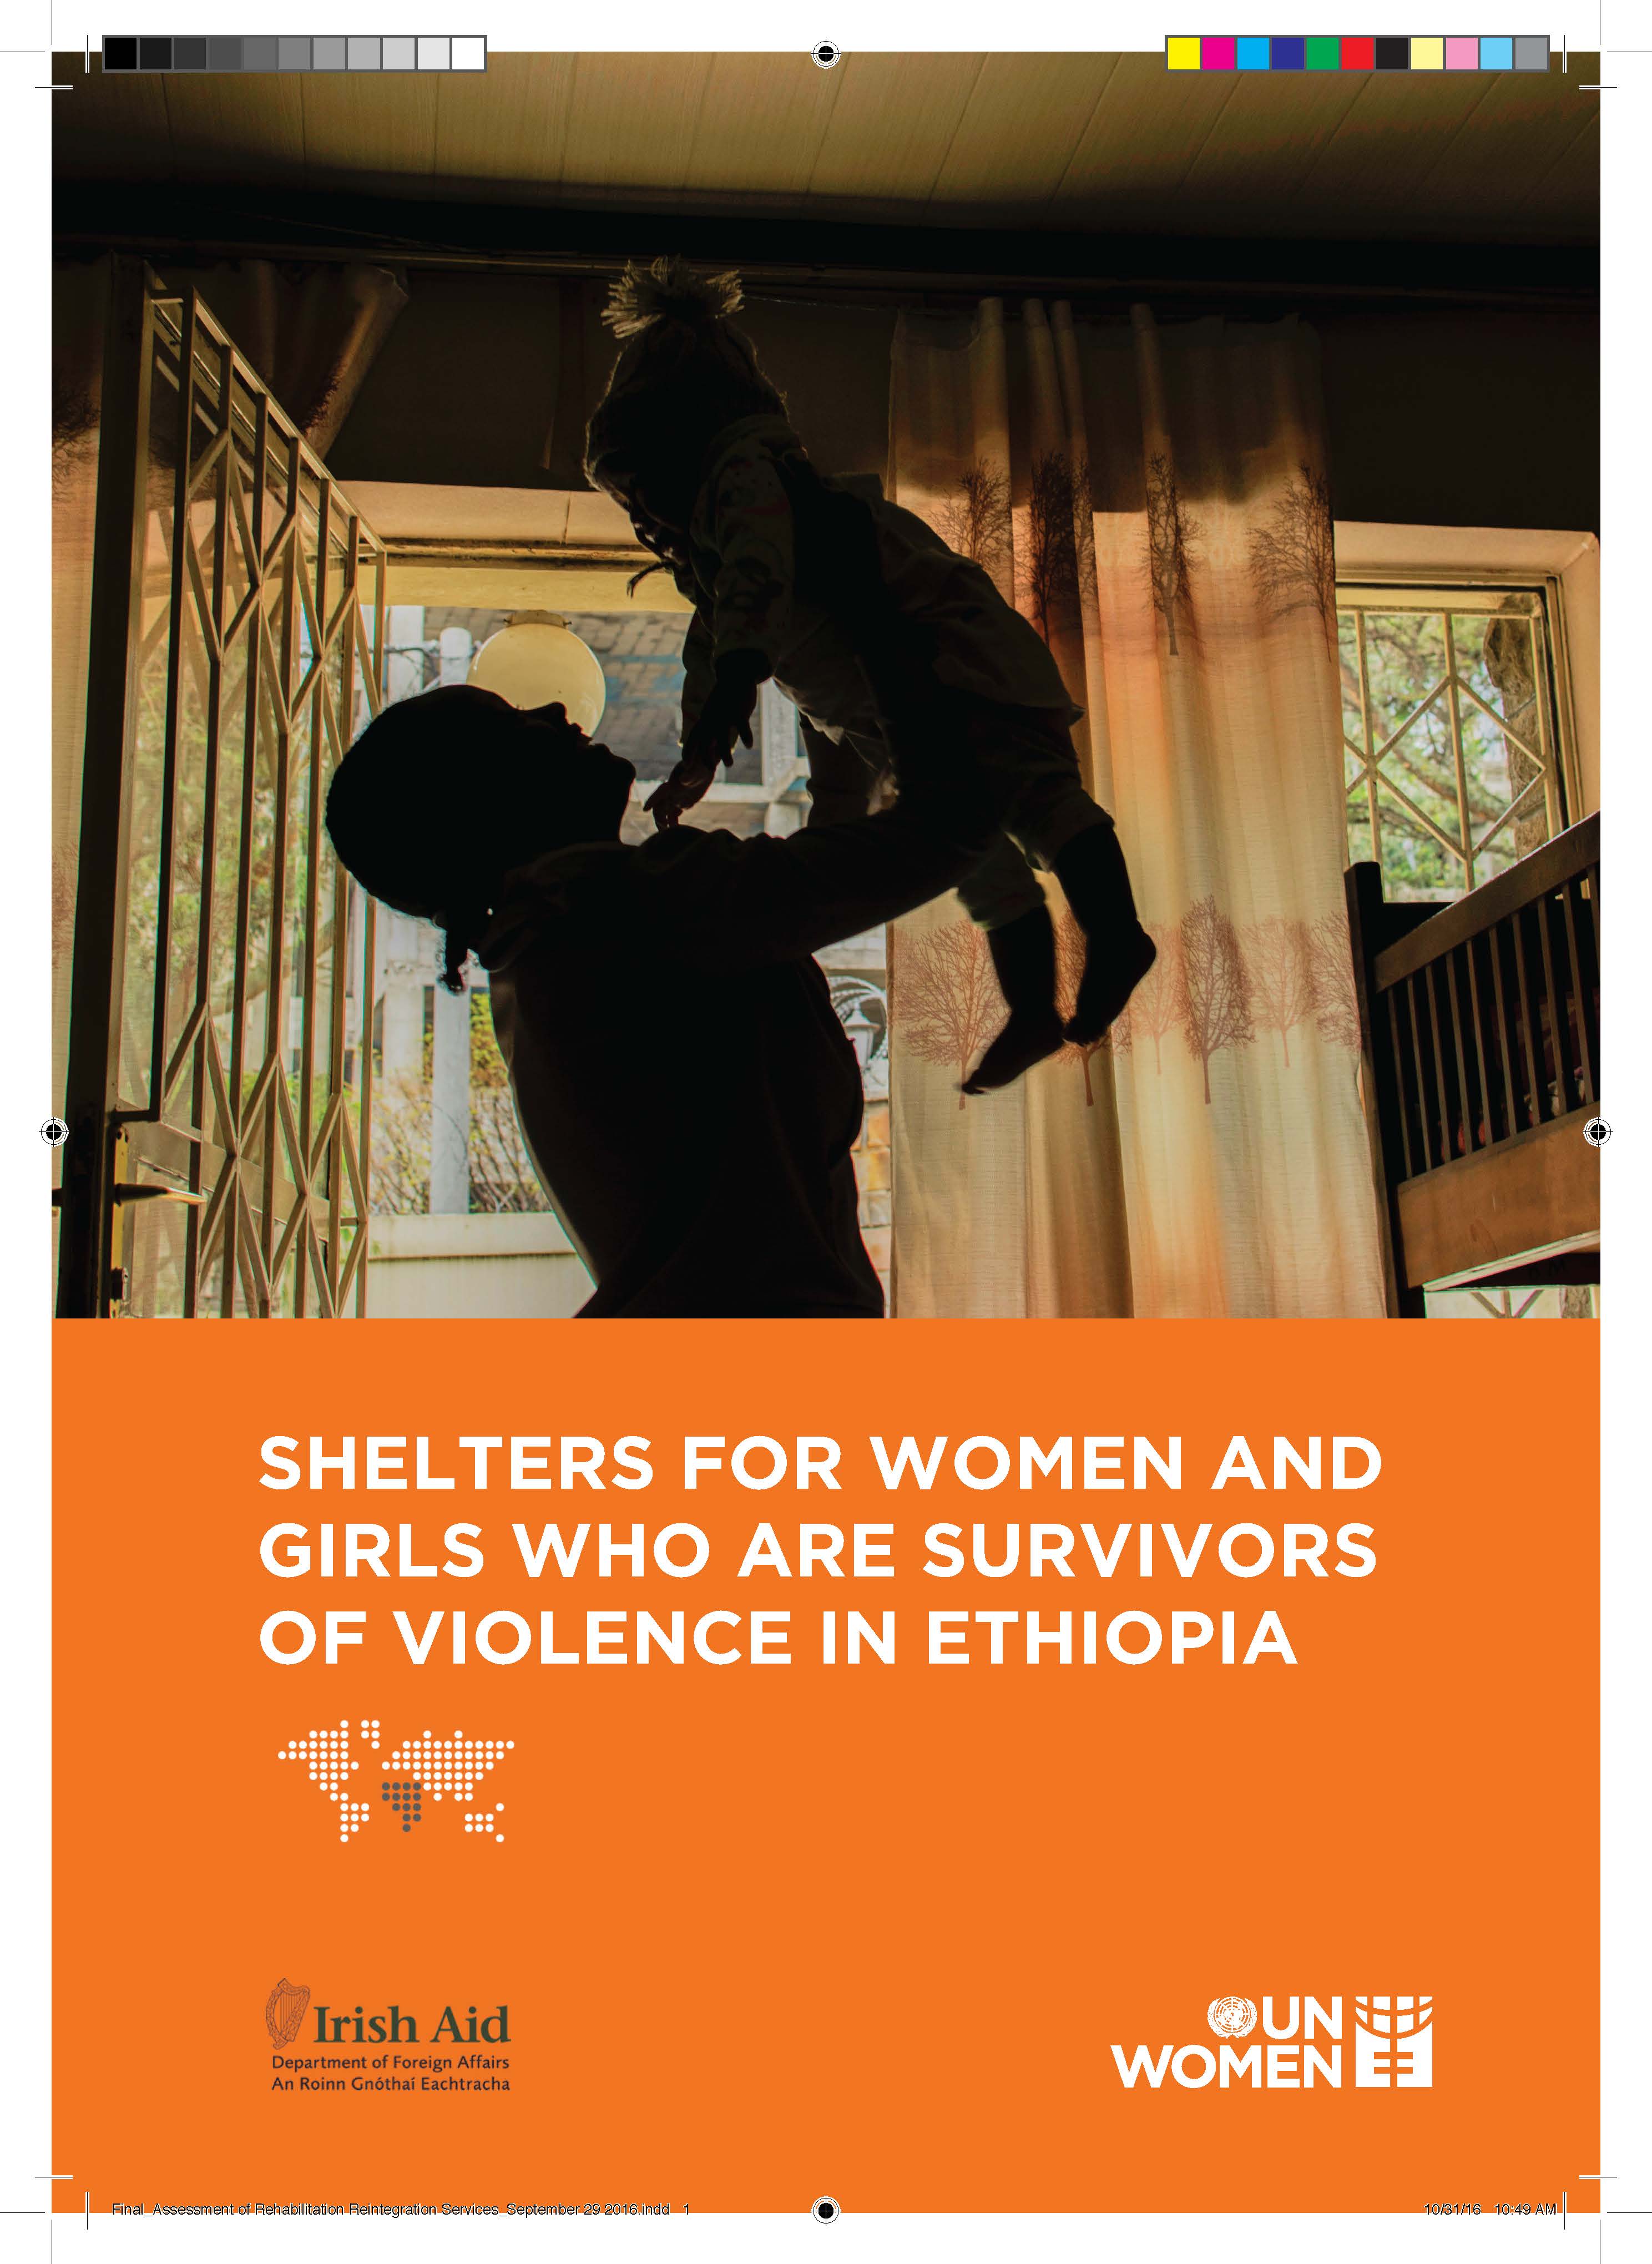 Shelters for women in Ethiopia